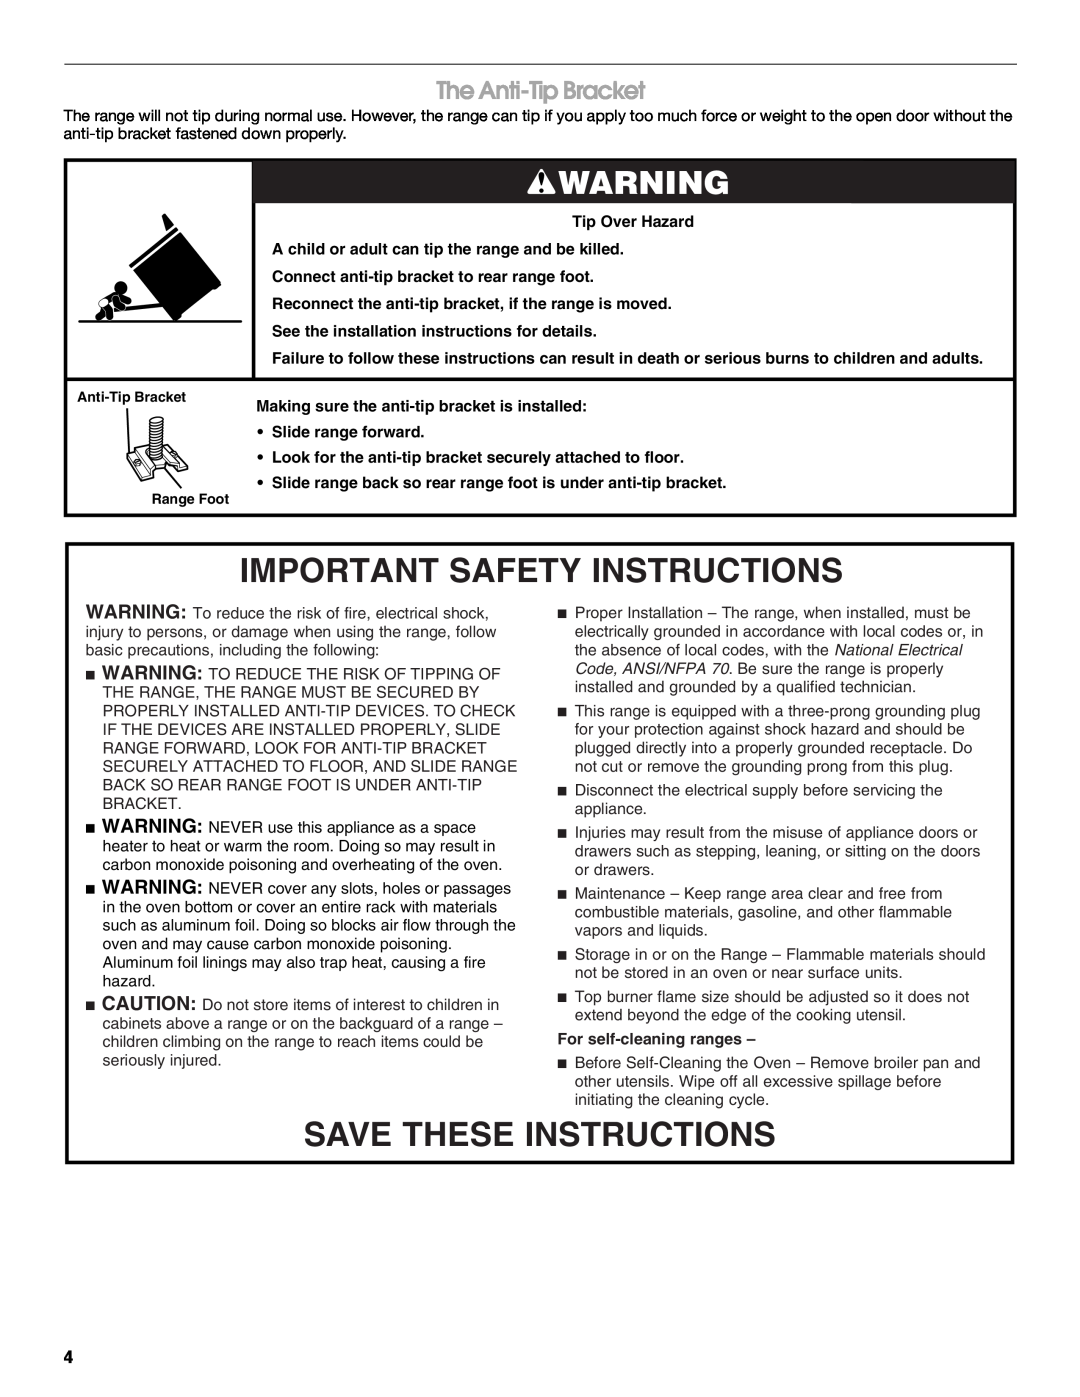 Whirlpool W10106870 Important Safety Instructions, Save These Instructions, The Anti-Tip Bracket, For self-cleaning ranges 